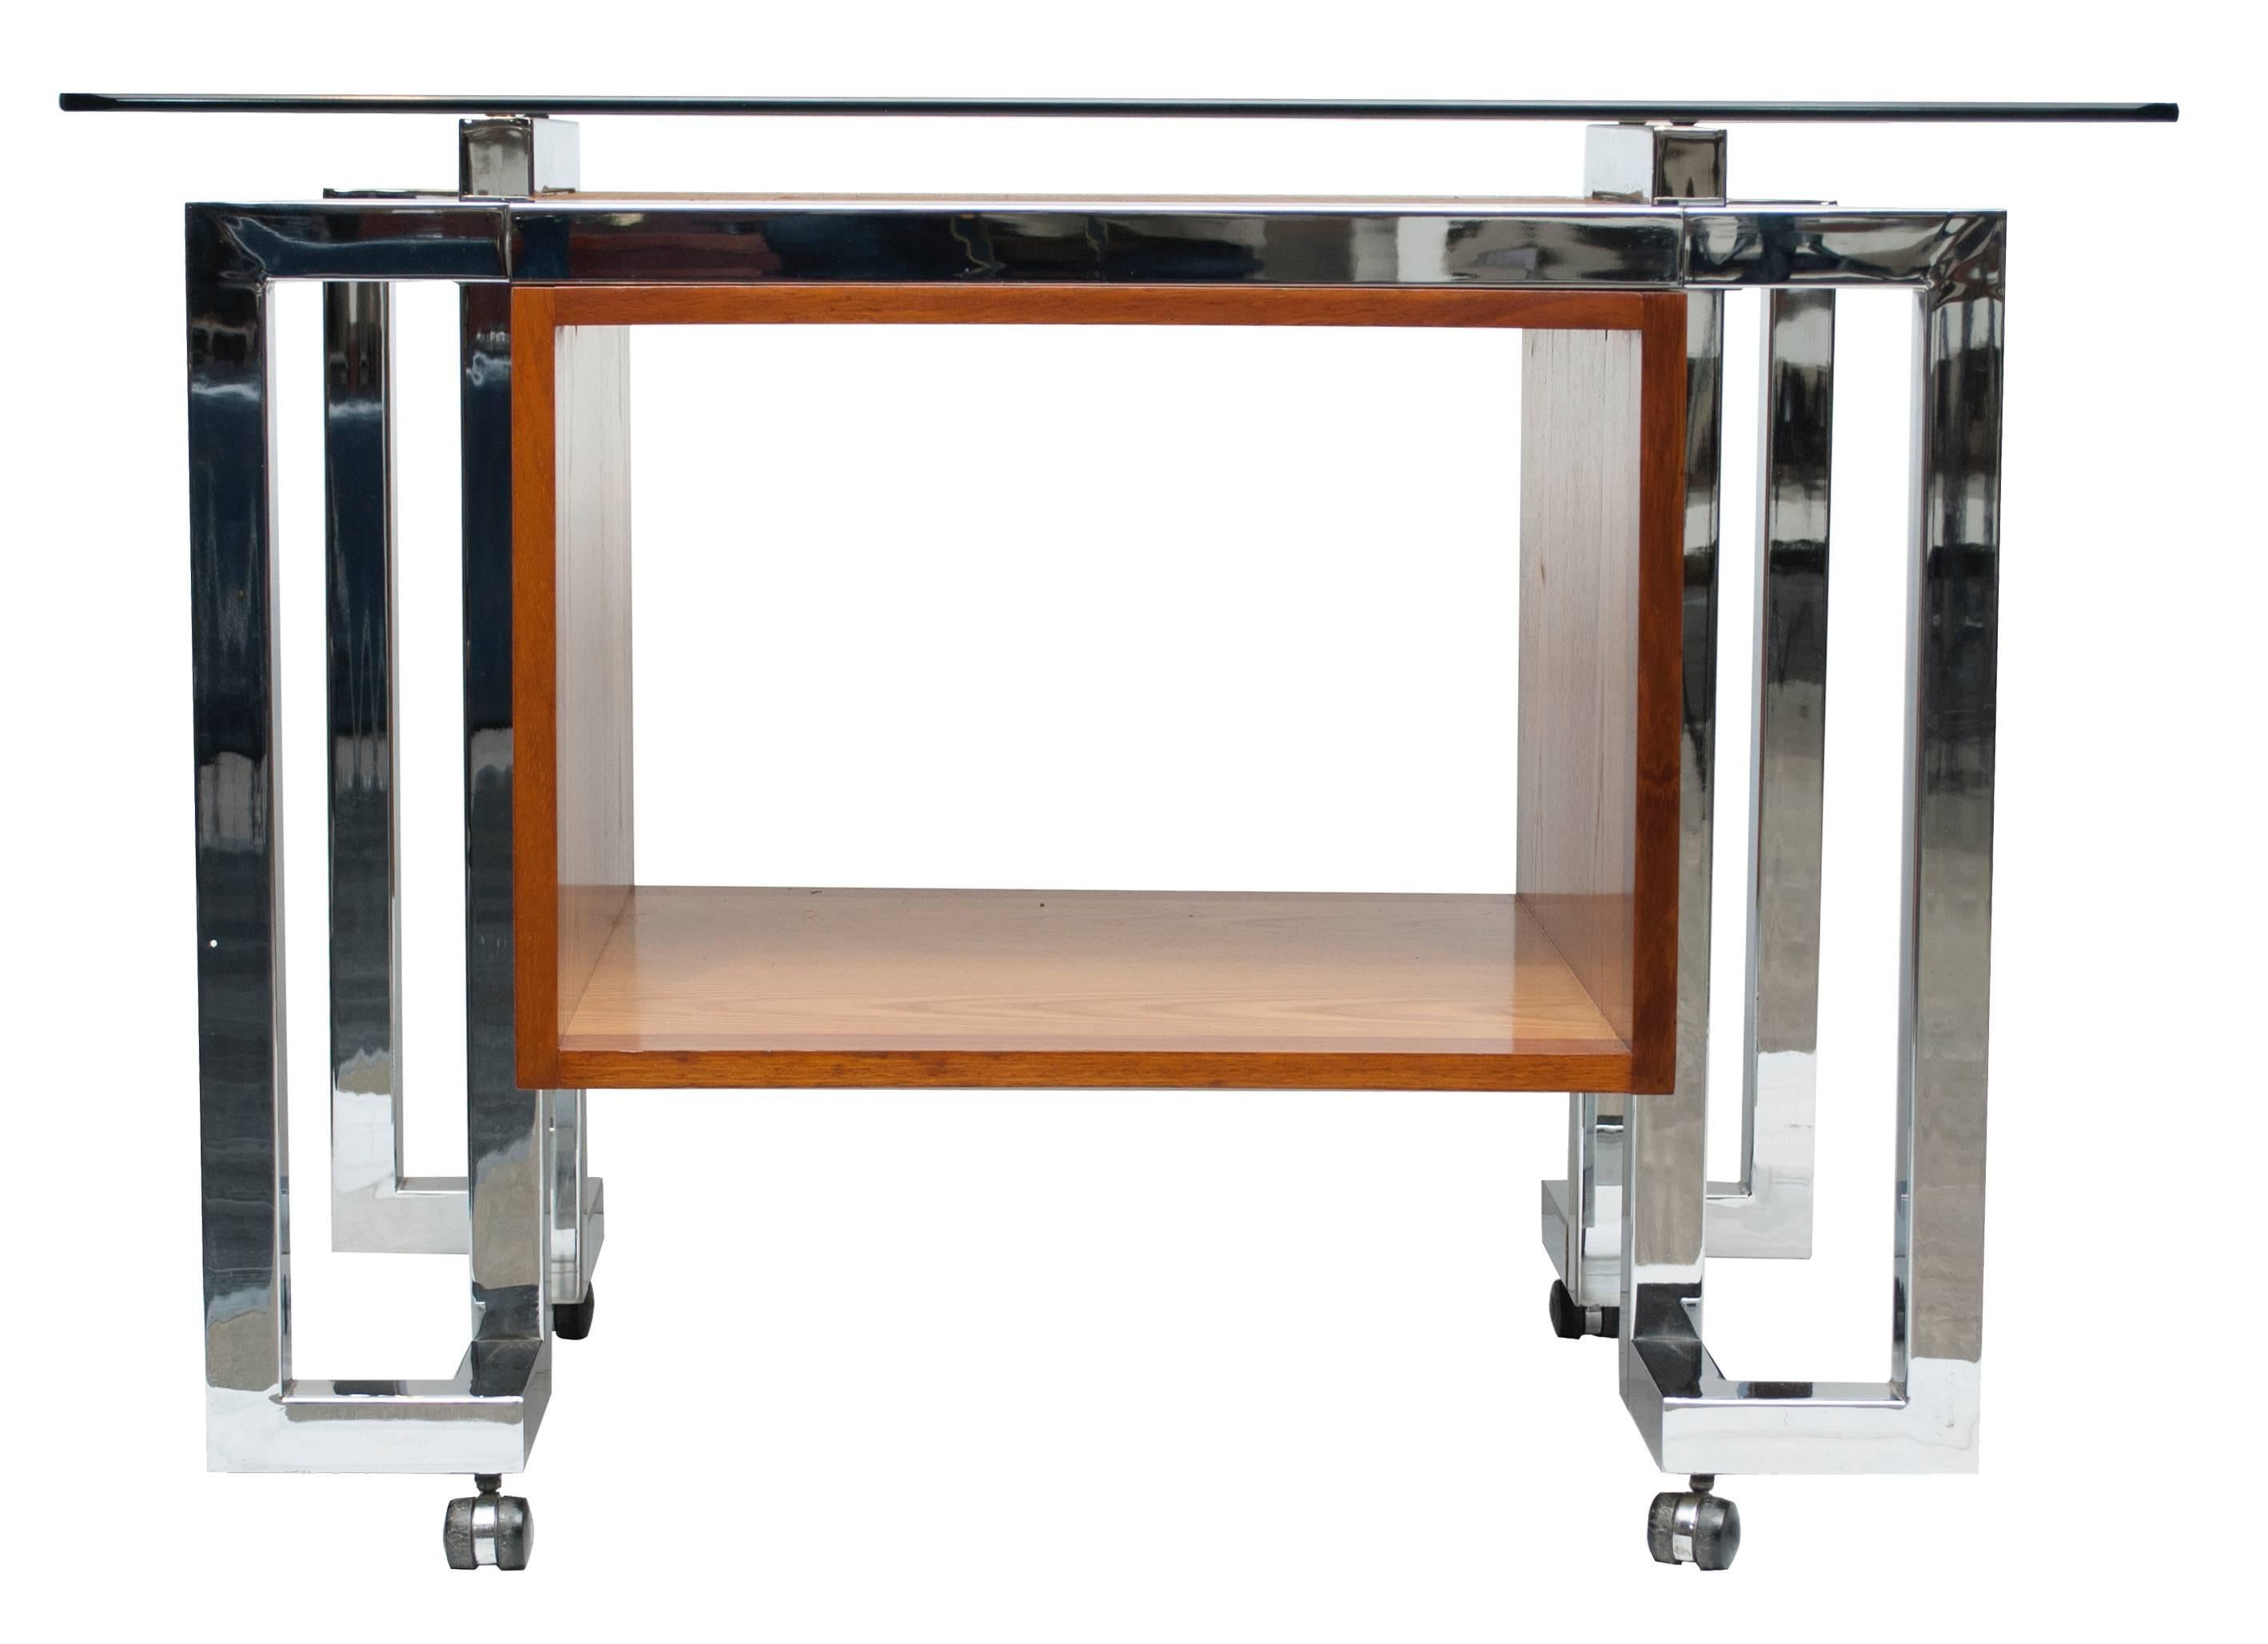 Midcentury design bar cart.
Midcentury chrome framed bar cart with hessian covered bar box from the mandarin range, designed by Tim Bates for Pieff, sold through Harrods and Heals of London.
Thick plate smoked glass top, square chrome frame with